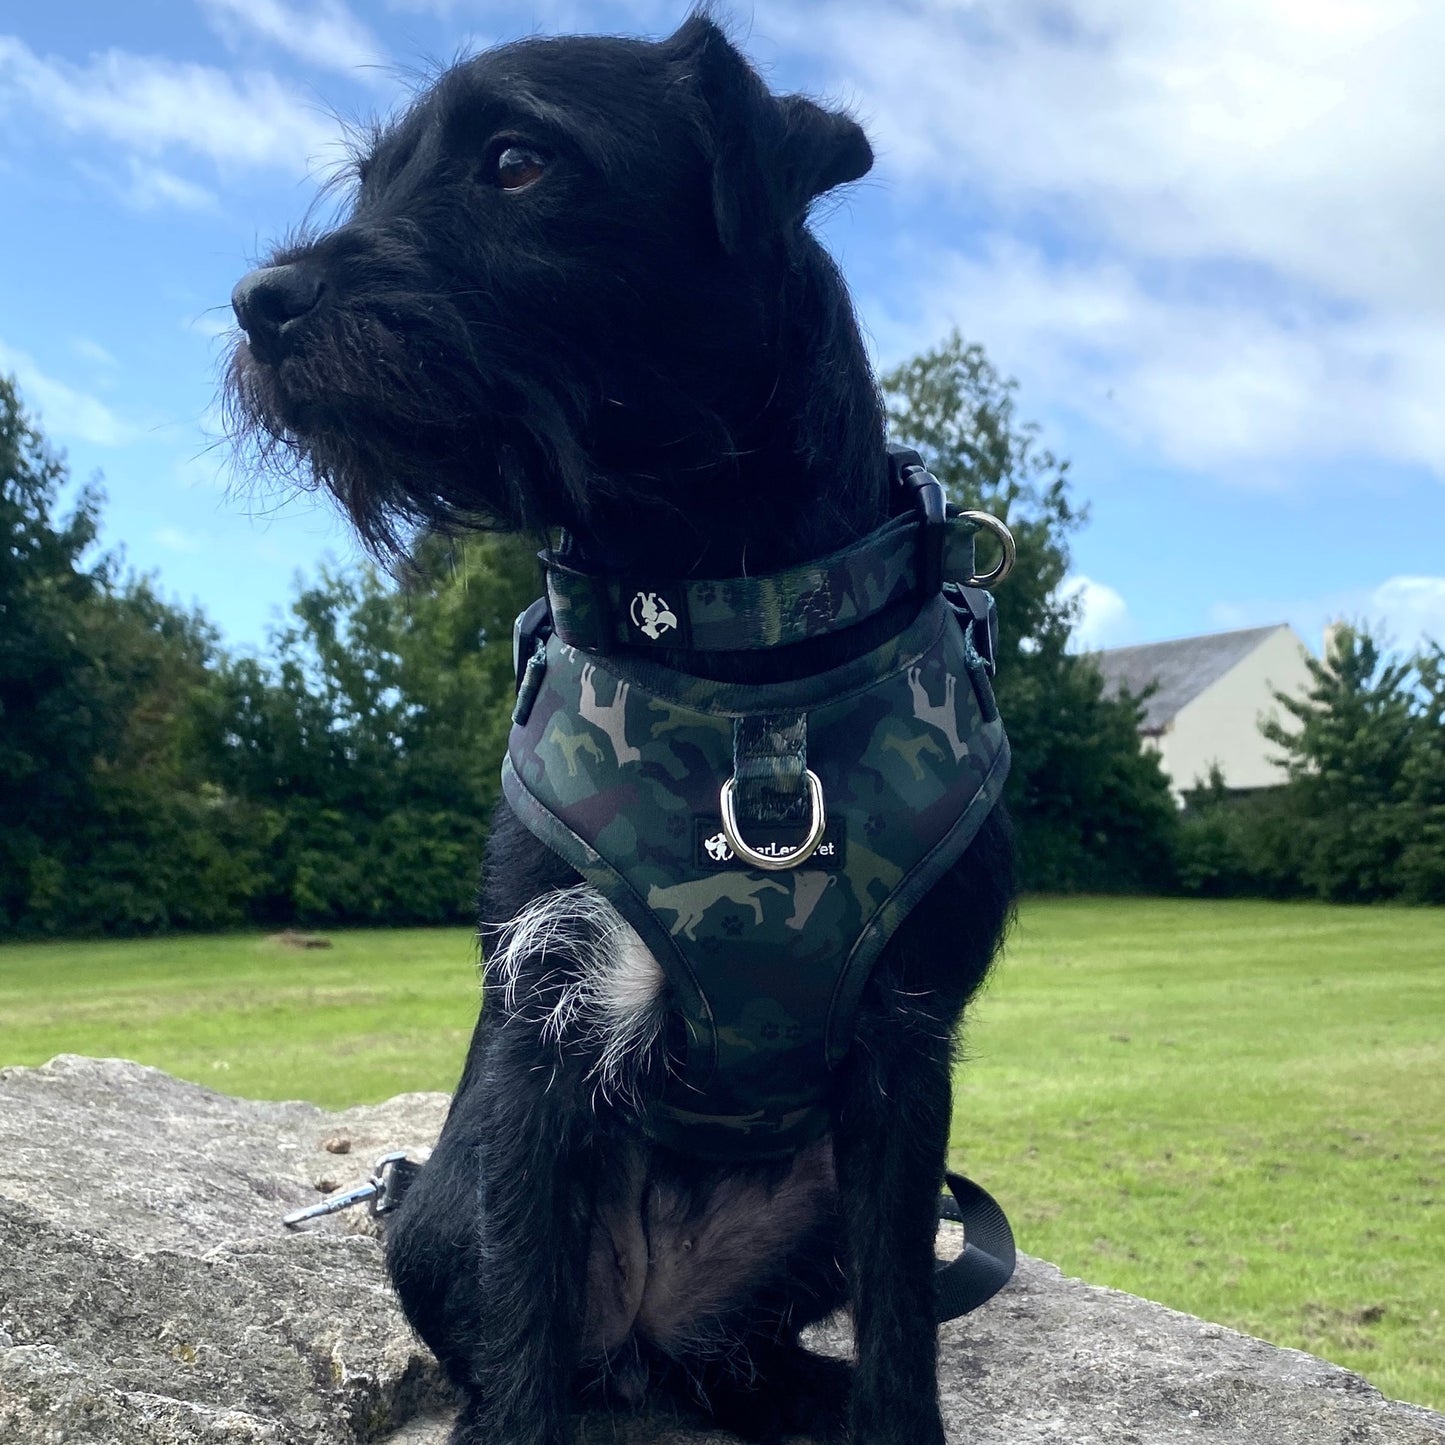 a photo of a black dog wearing a green camouflage collar and matching harness sitting on a rock with grass and blue sky with clouds in the background